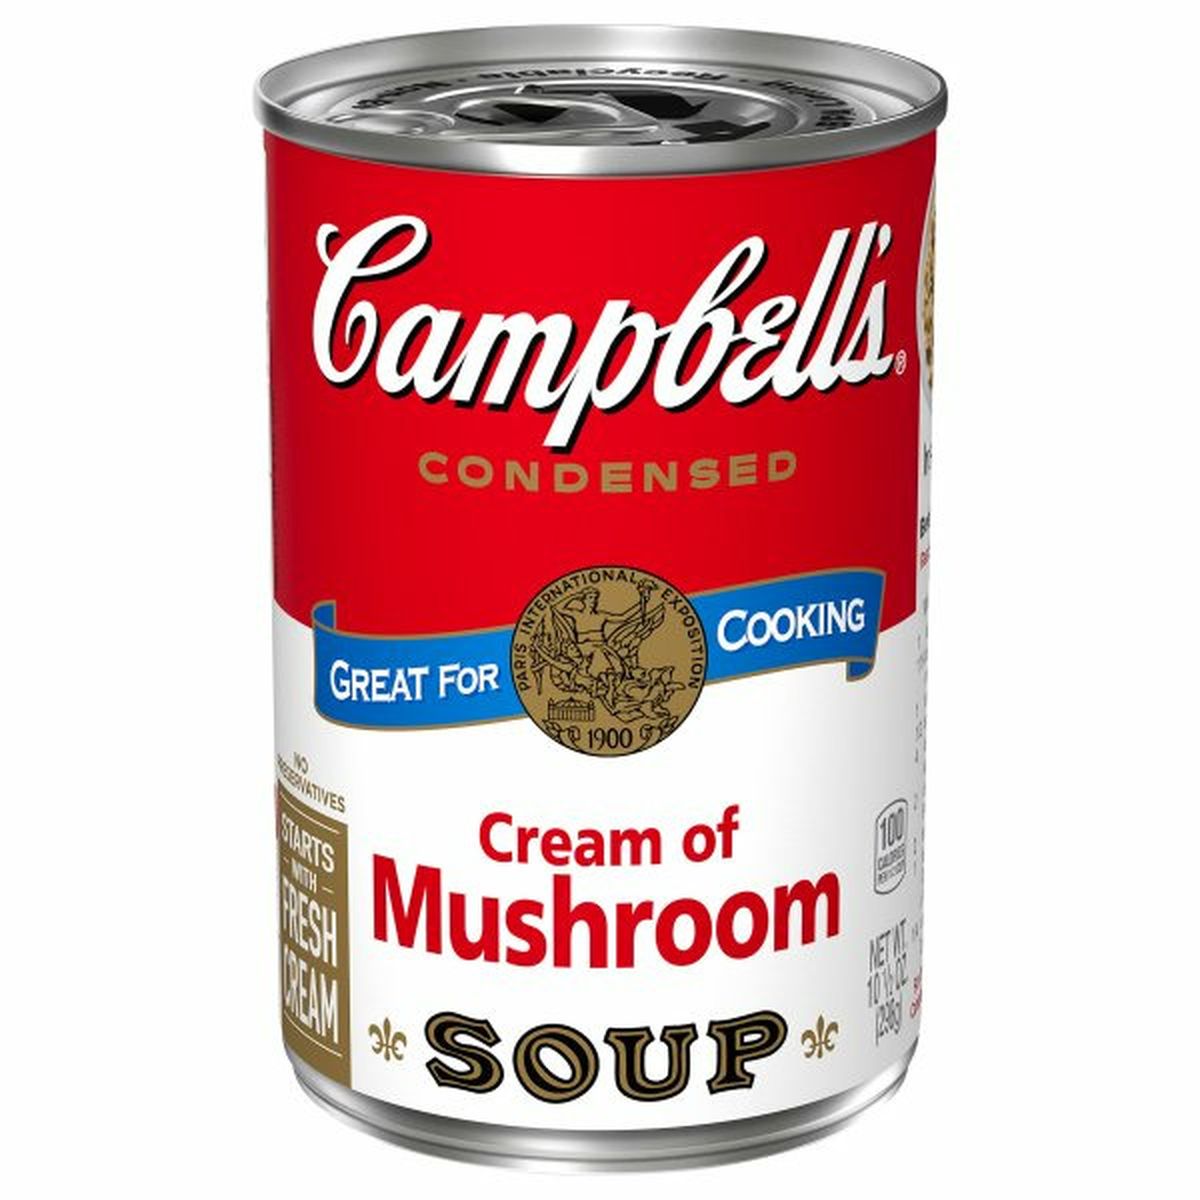 Calories in Campbell's Soup, Cream of Mushroom, Condensed